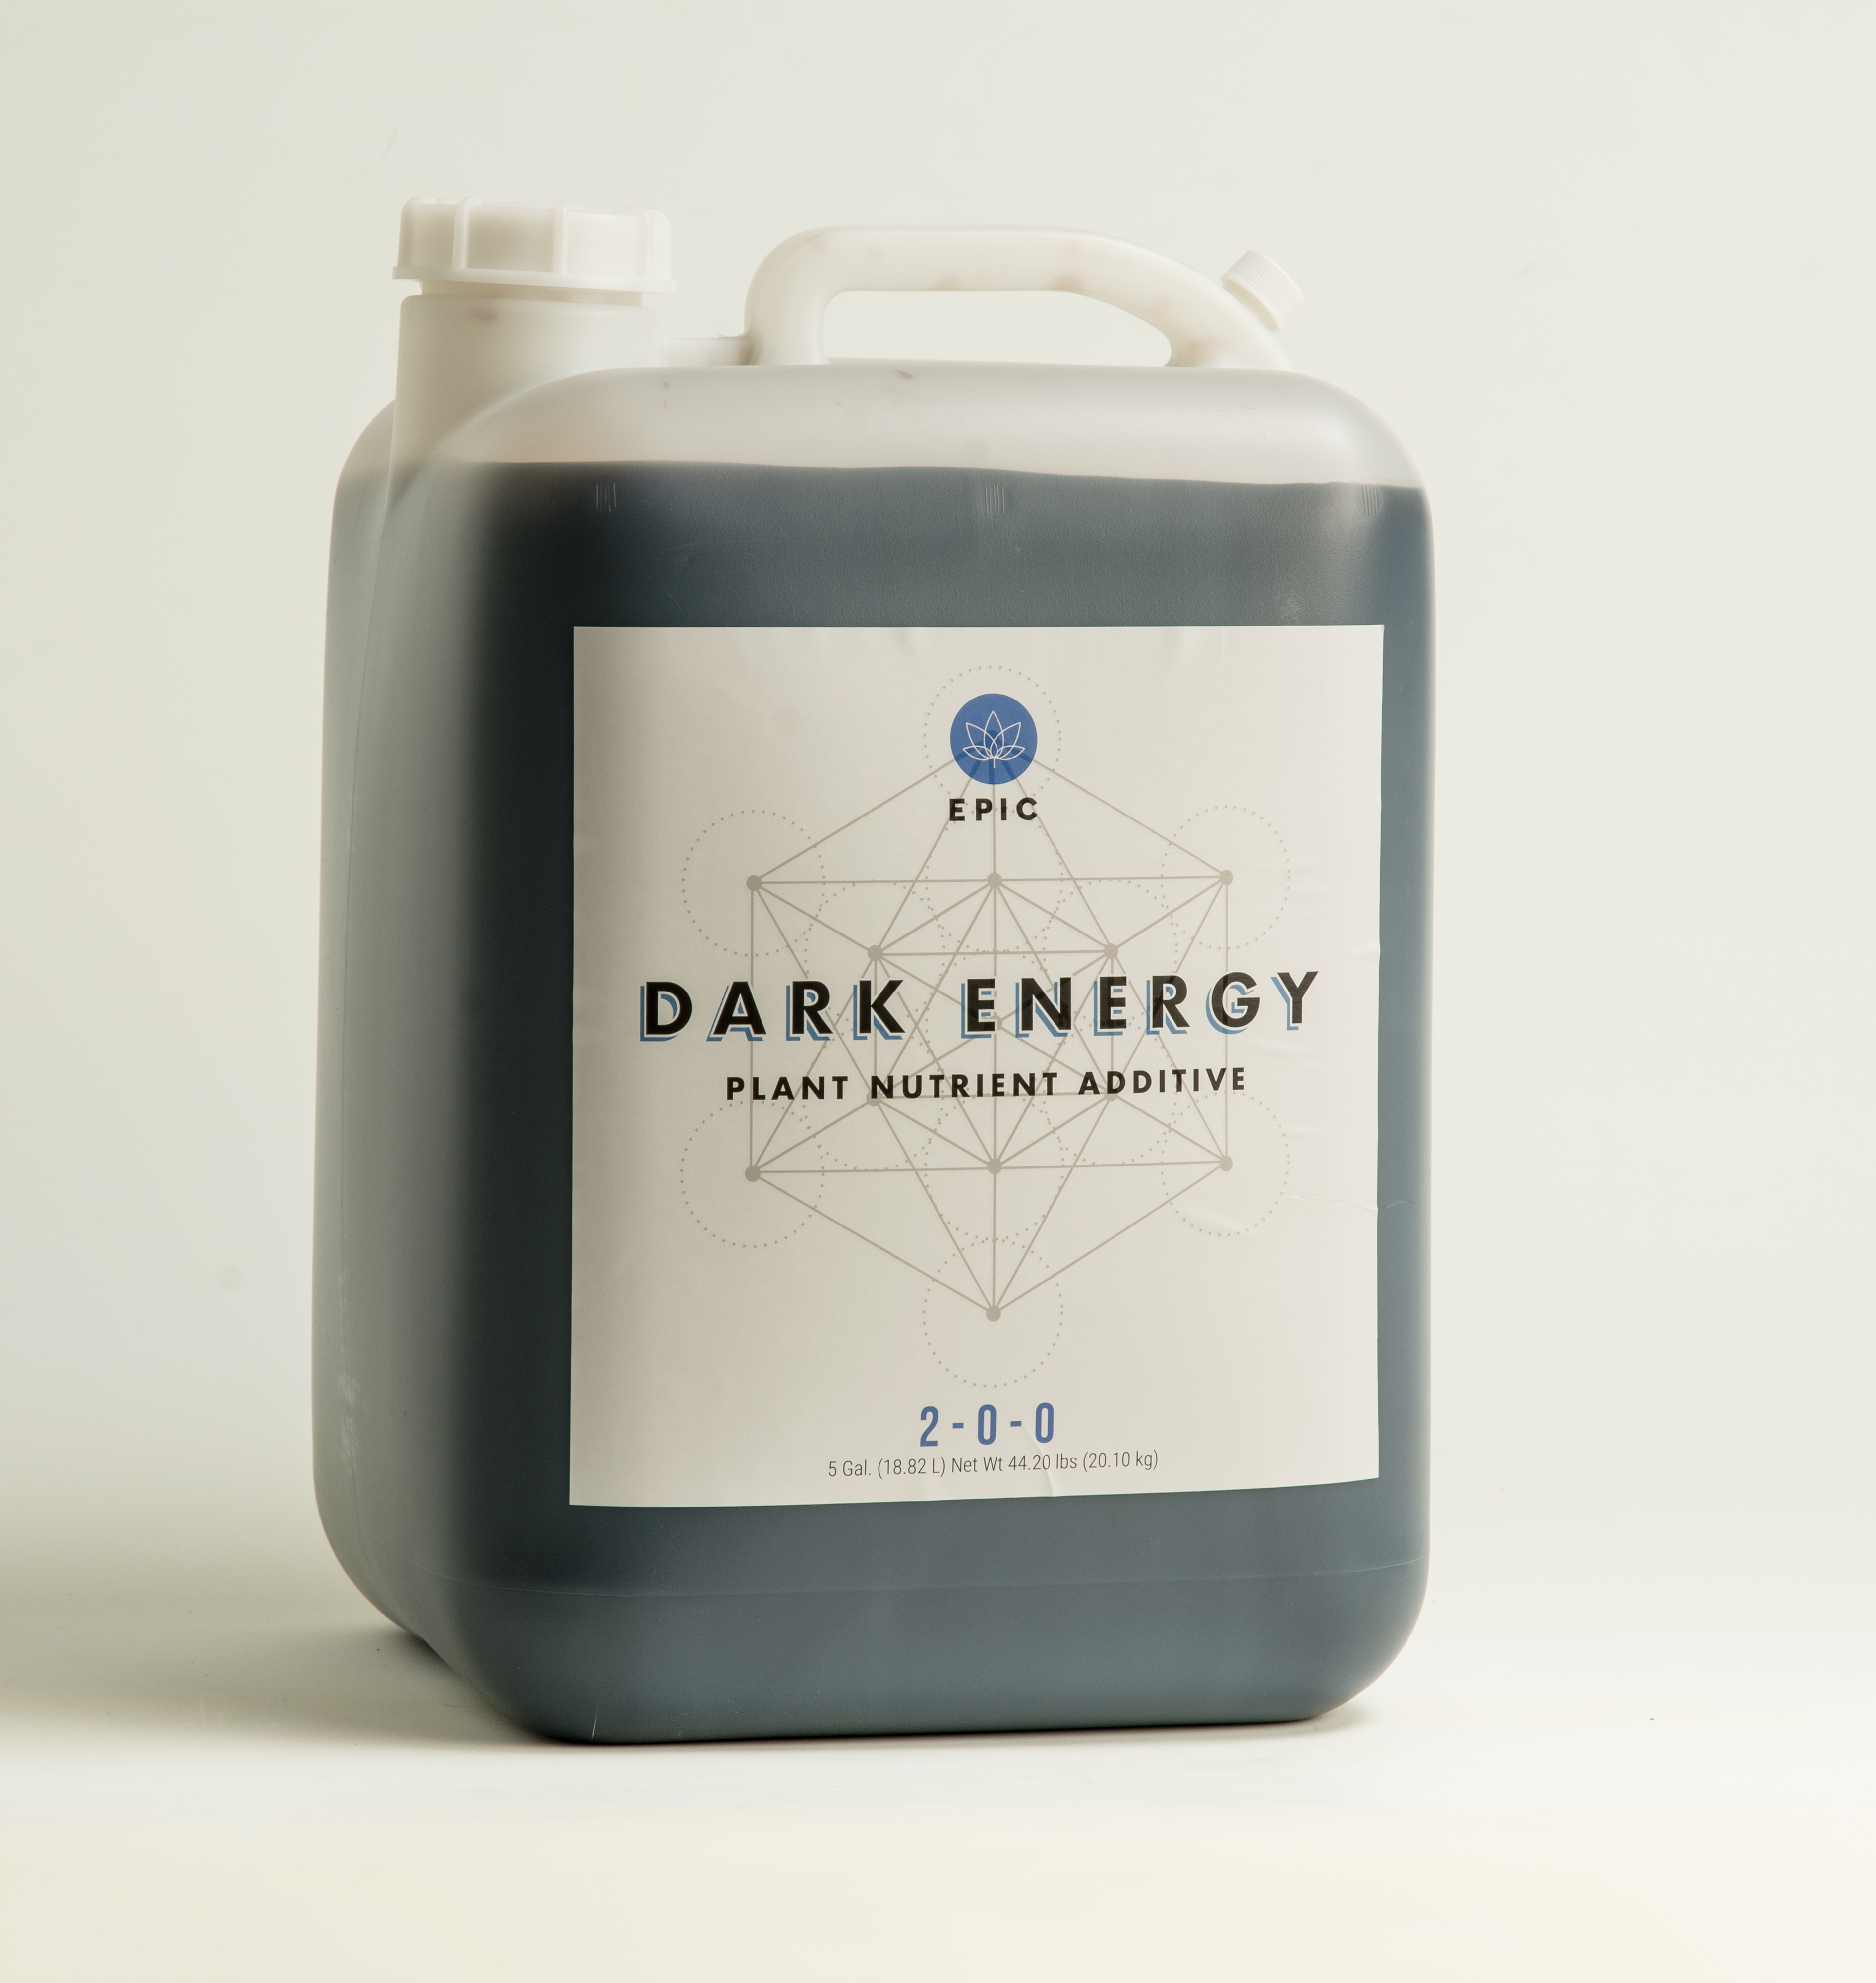 Picture for Dark Energy, 5 gal